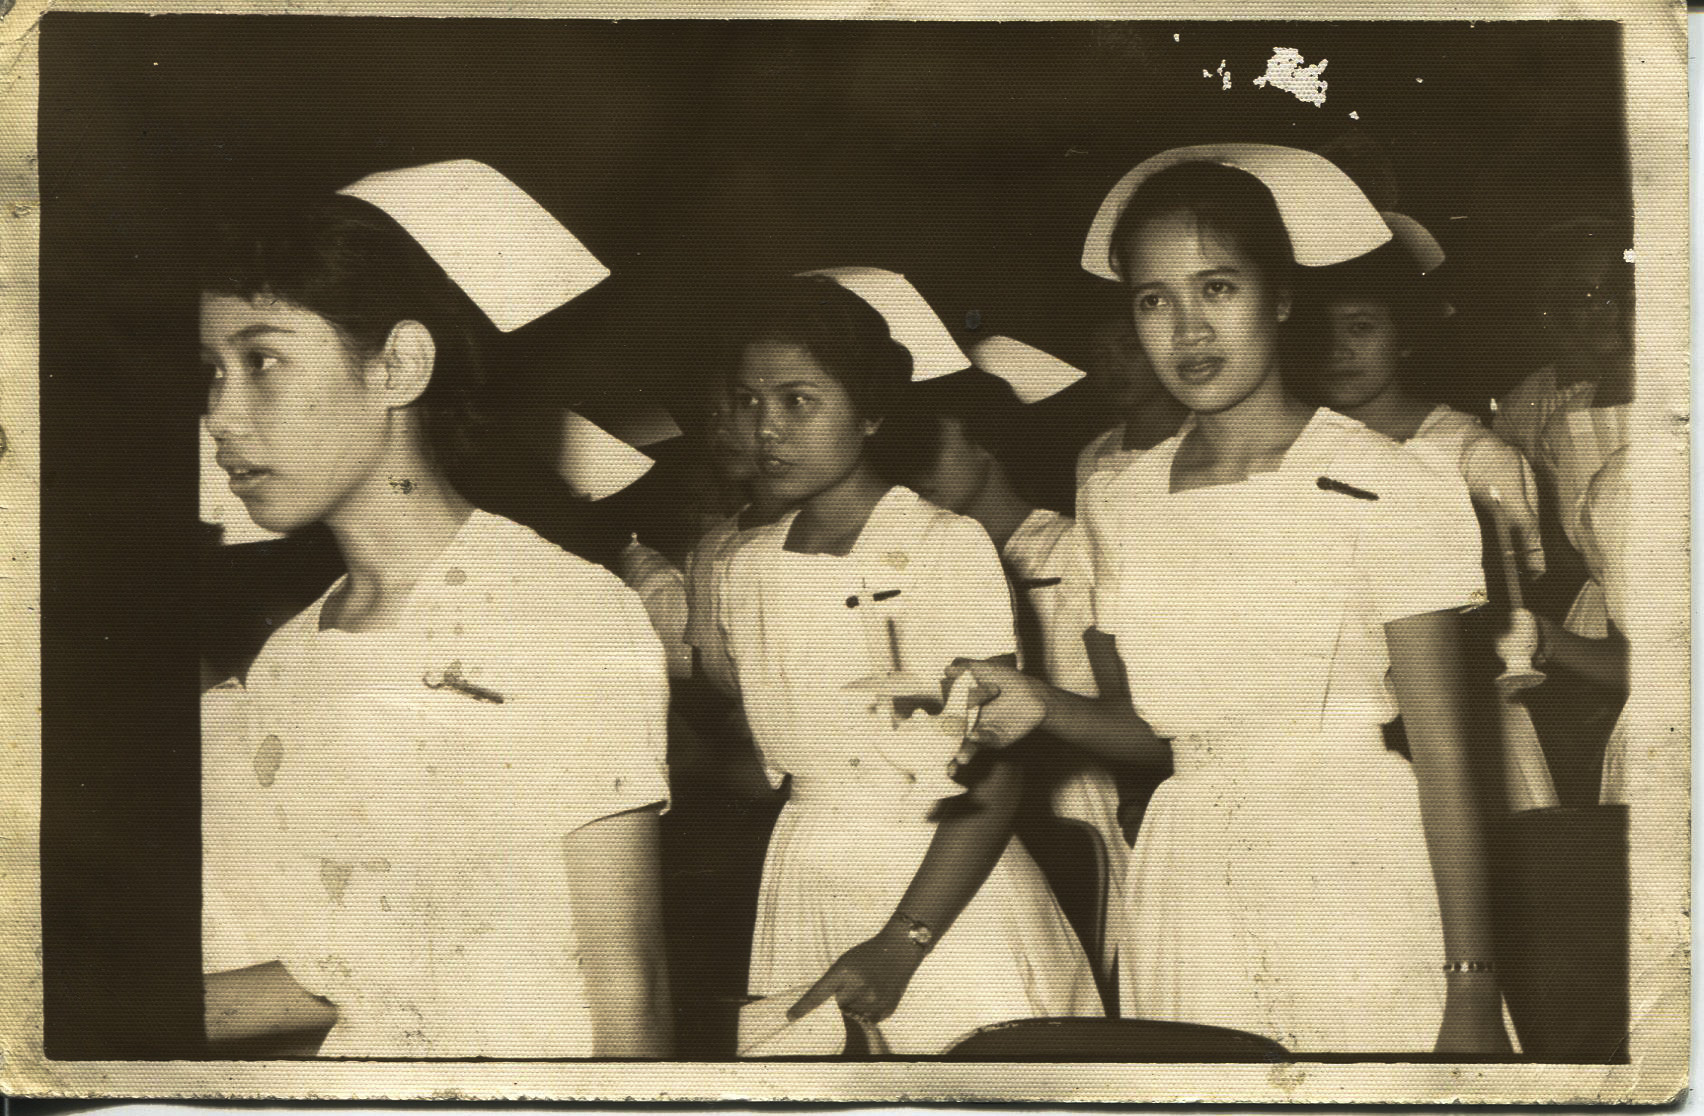 Photo of Tan's graduation, 1963 - frontTaken in 1963 at a graduation from Florence Nightingale at Philippine General Hospital. The back says “Please return to Necitas D. Tan class of 1963”. The photo shows Agnes Bandon (a friend of Tan’s - Bandon is her maiden name); Necitas; and Gaying Dime (a friend ofTan’s). Tan said, “My life started. I was meant to be a nurse”. Tan started school majoring in chemical engineering. Any views, findings, conclusions, or recommendations expressed in this story do not necessarily represent those of the National Endowment for the Humanities. (c) Field Museum of Natural History - CC BY-NC 4.0